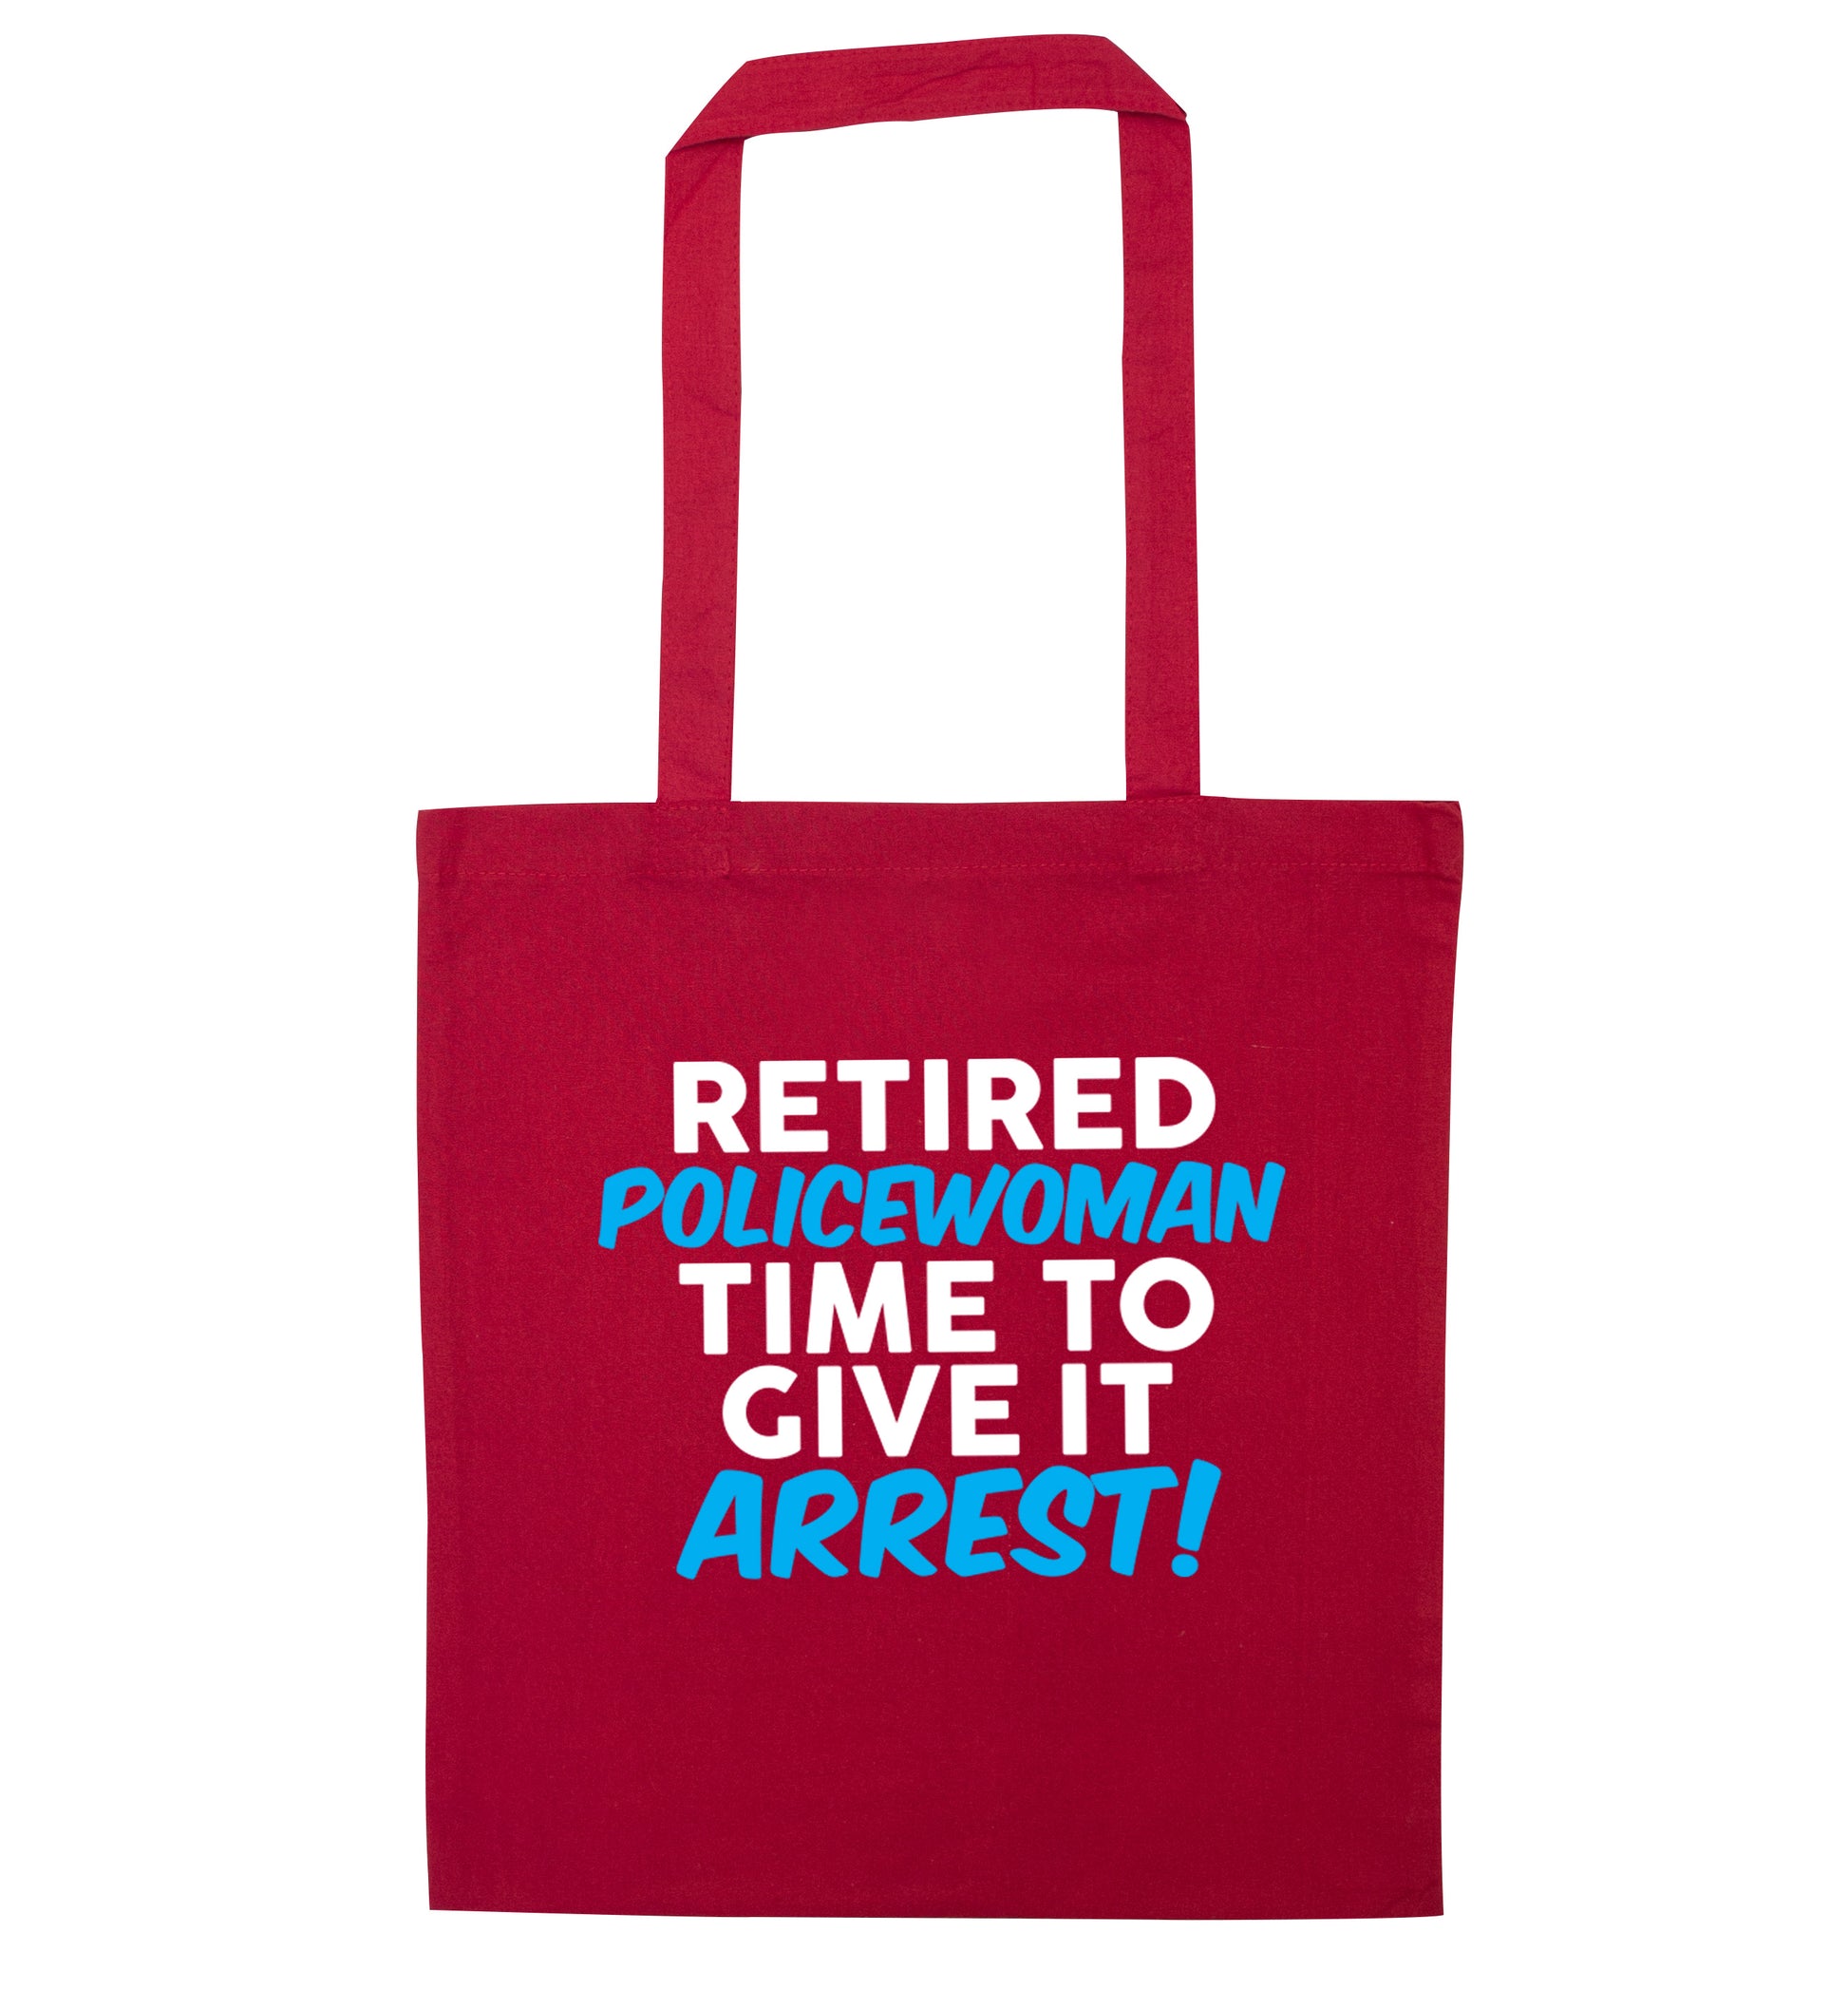 Retired policewoman time to give it arrest red tote bag